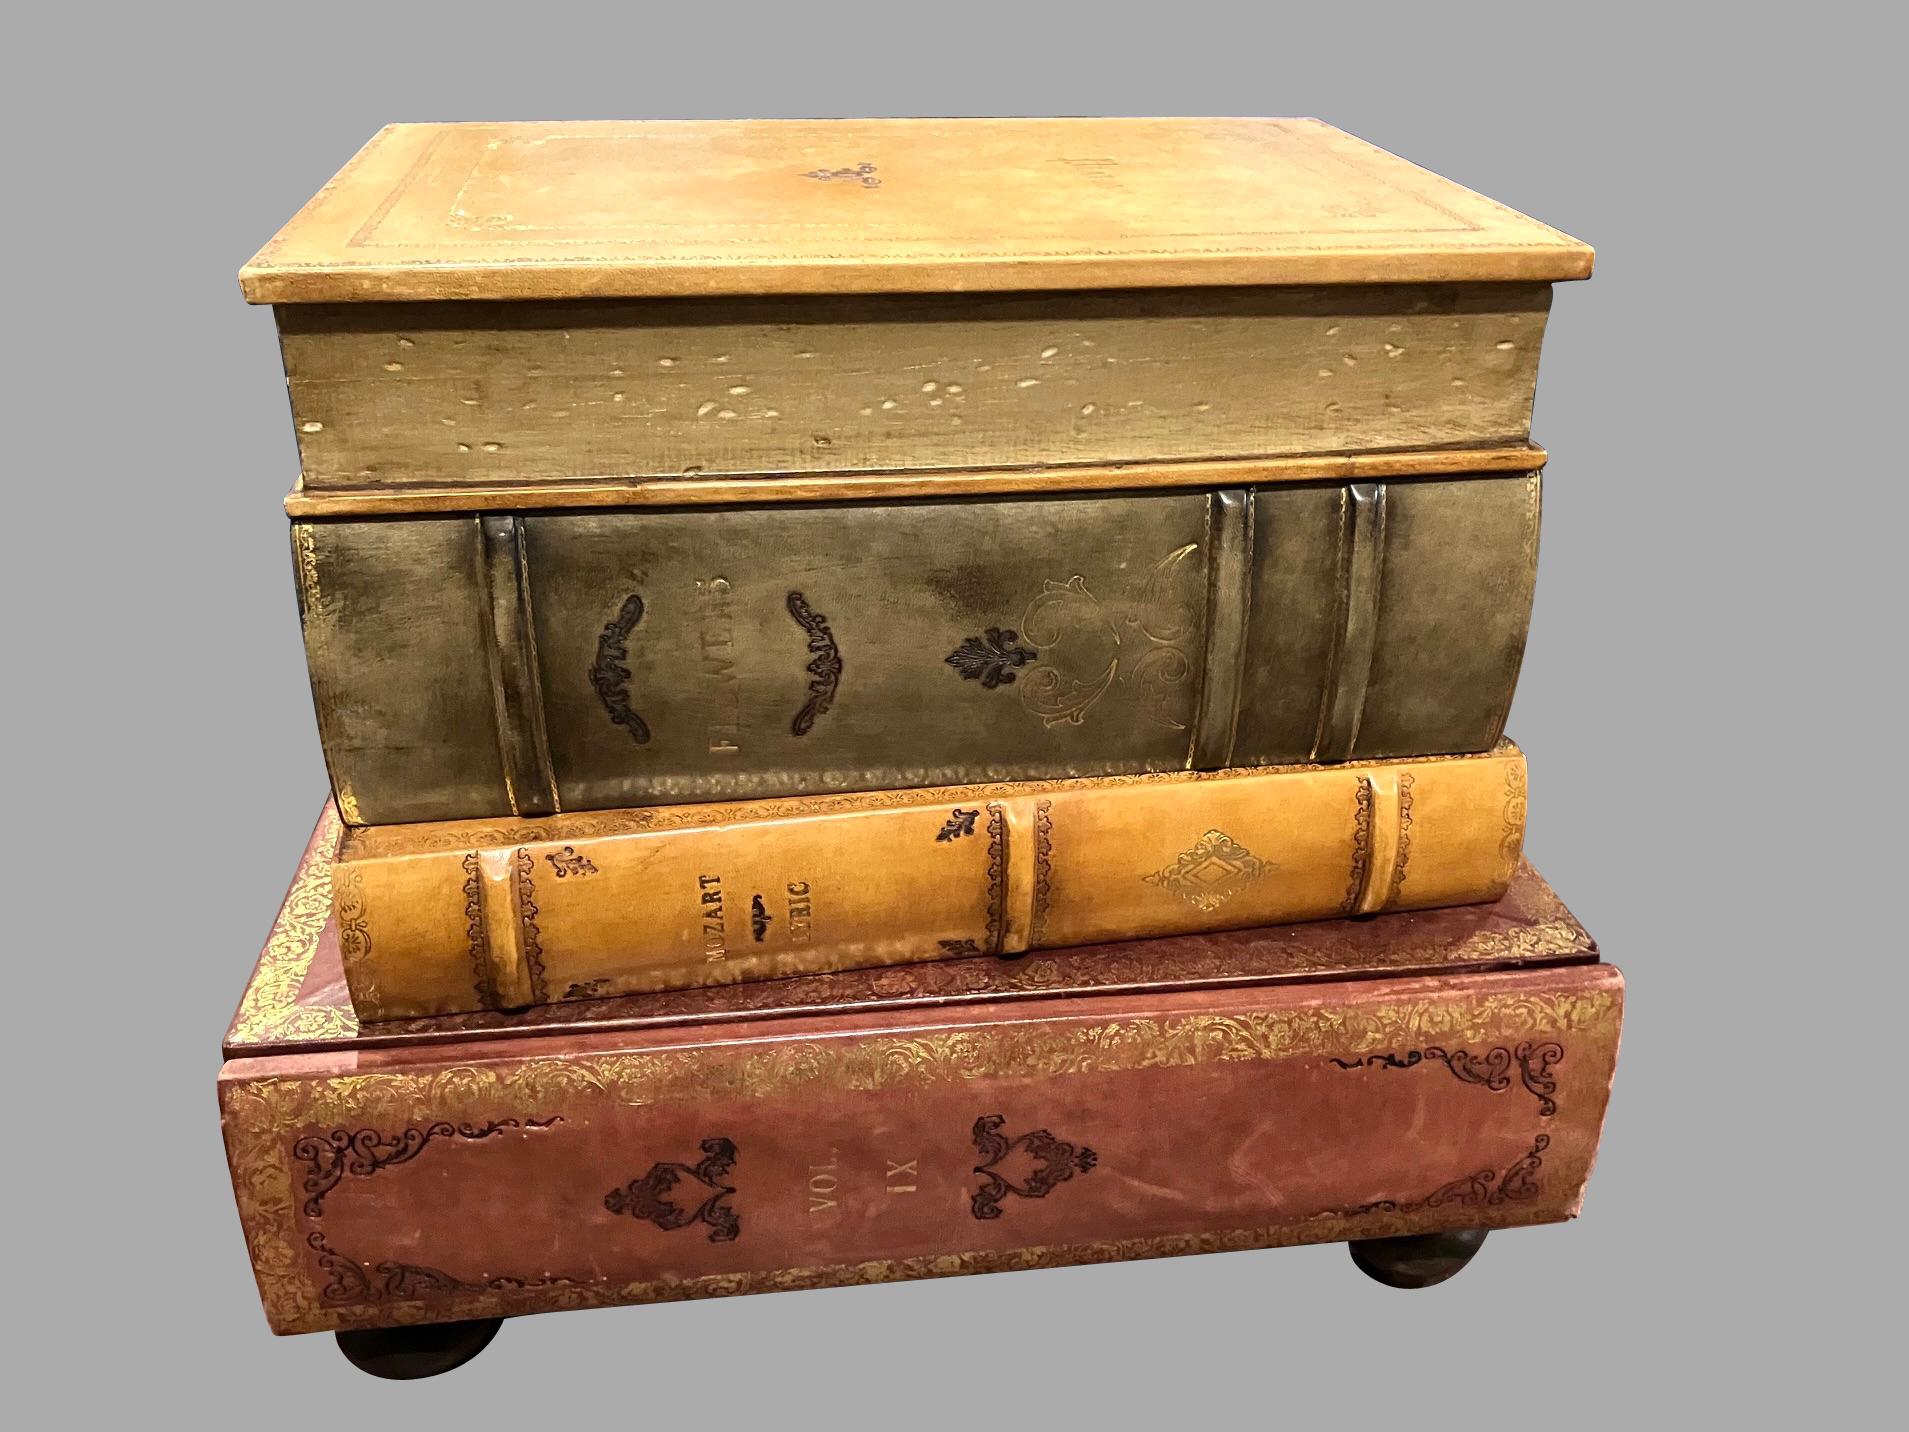 20th Century Italian Book Form Coffee Table with Drawer Retailed by Scully & Scully For Sale